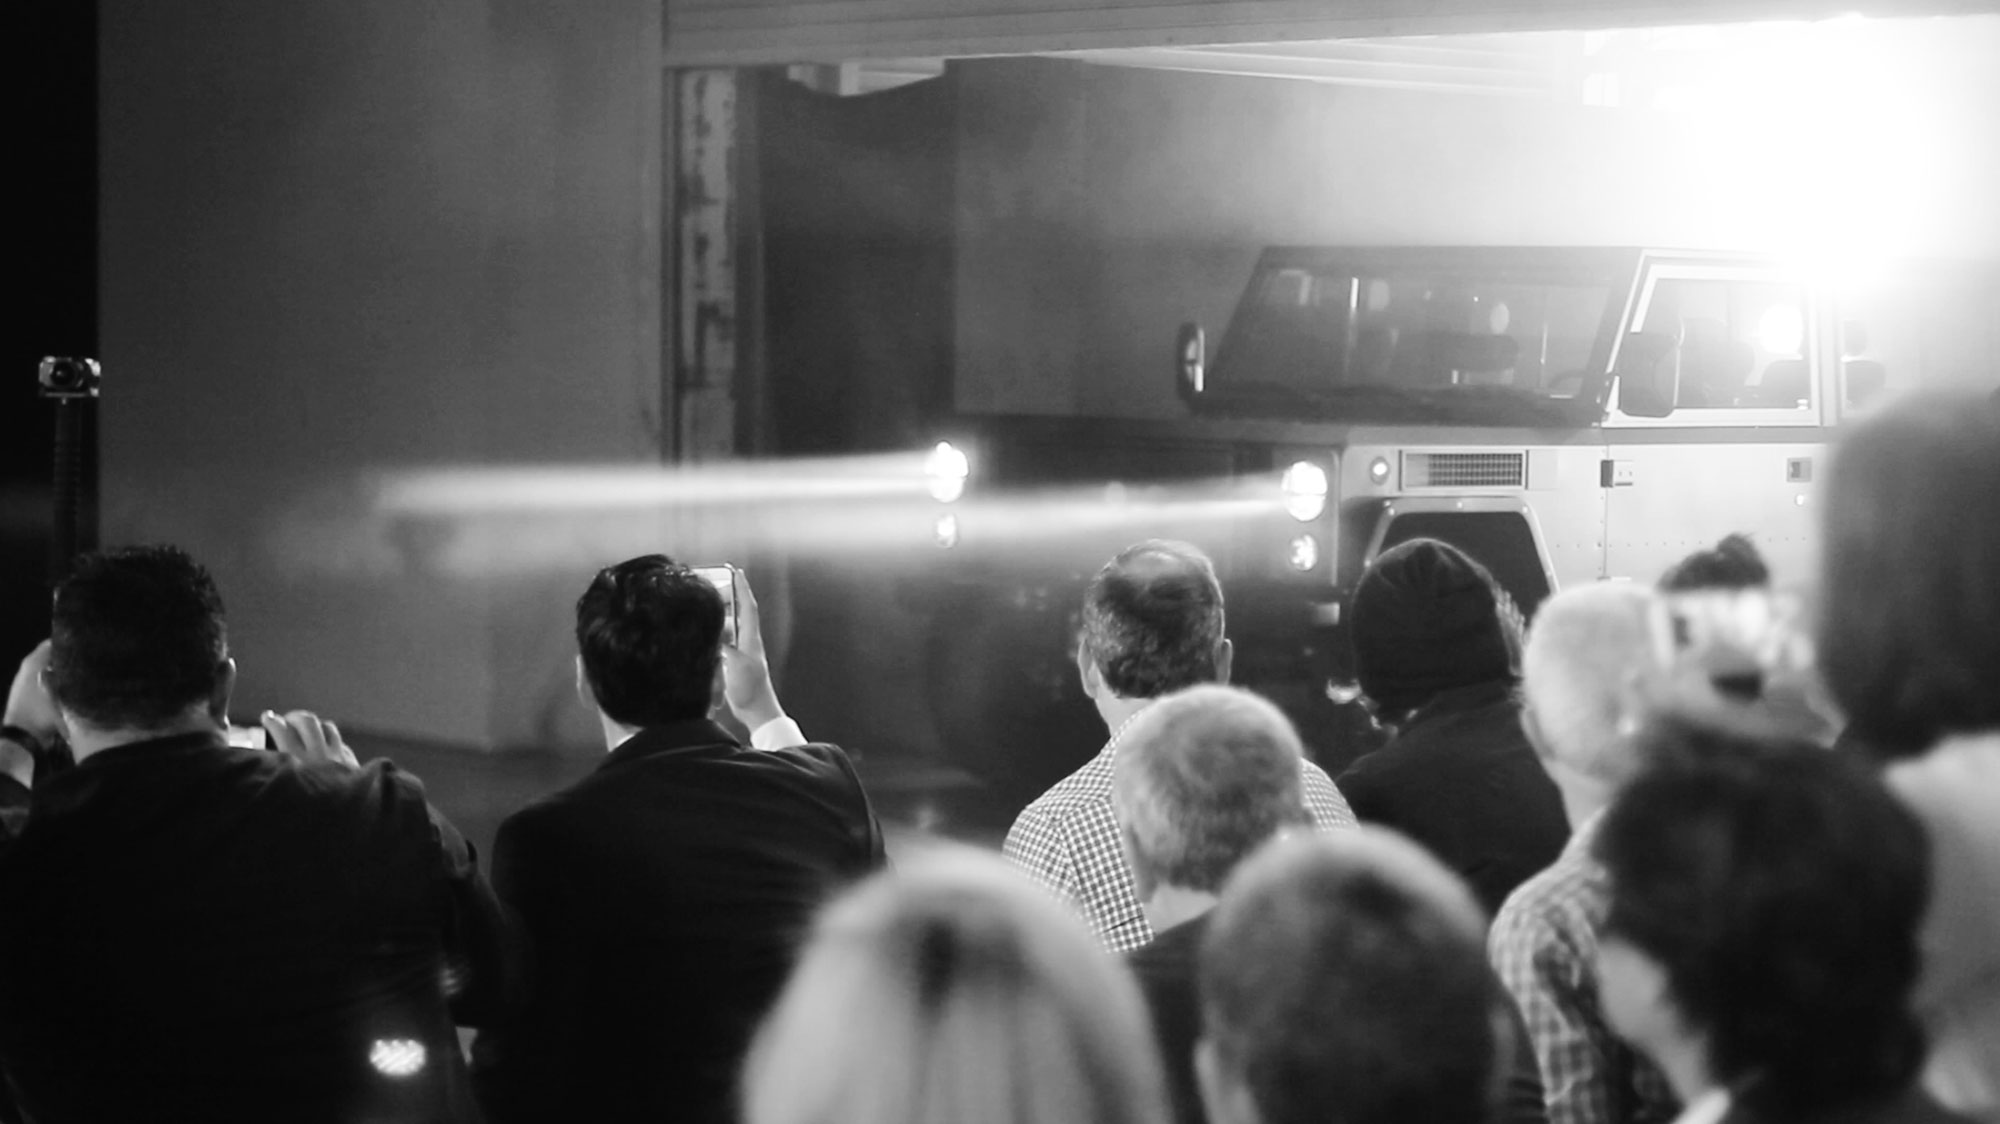 The Bollinger B1 2 door being revealed in 2017, coming through lights and fog.